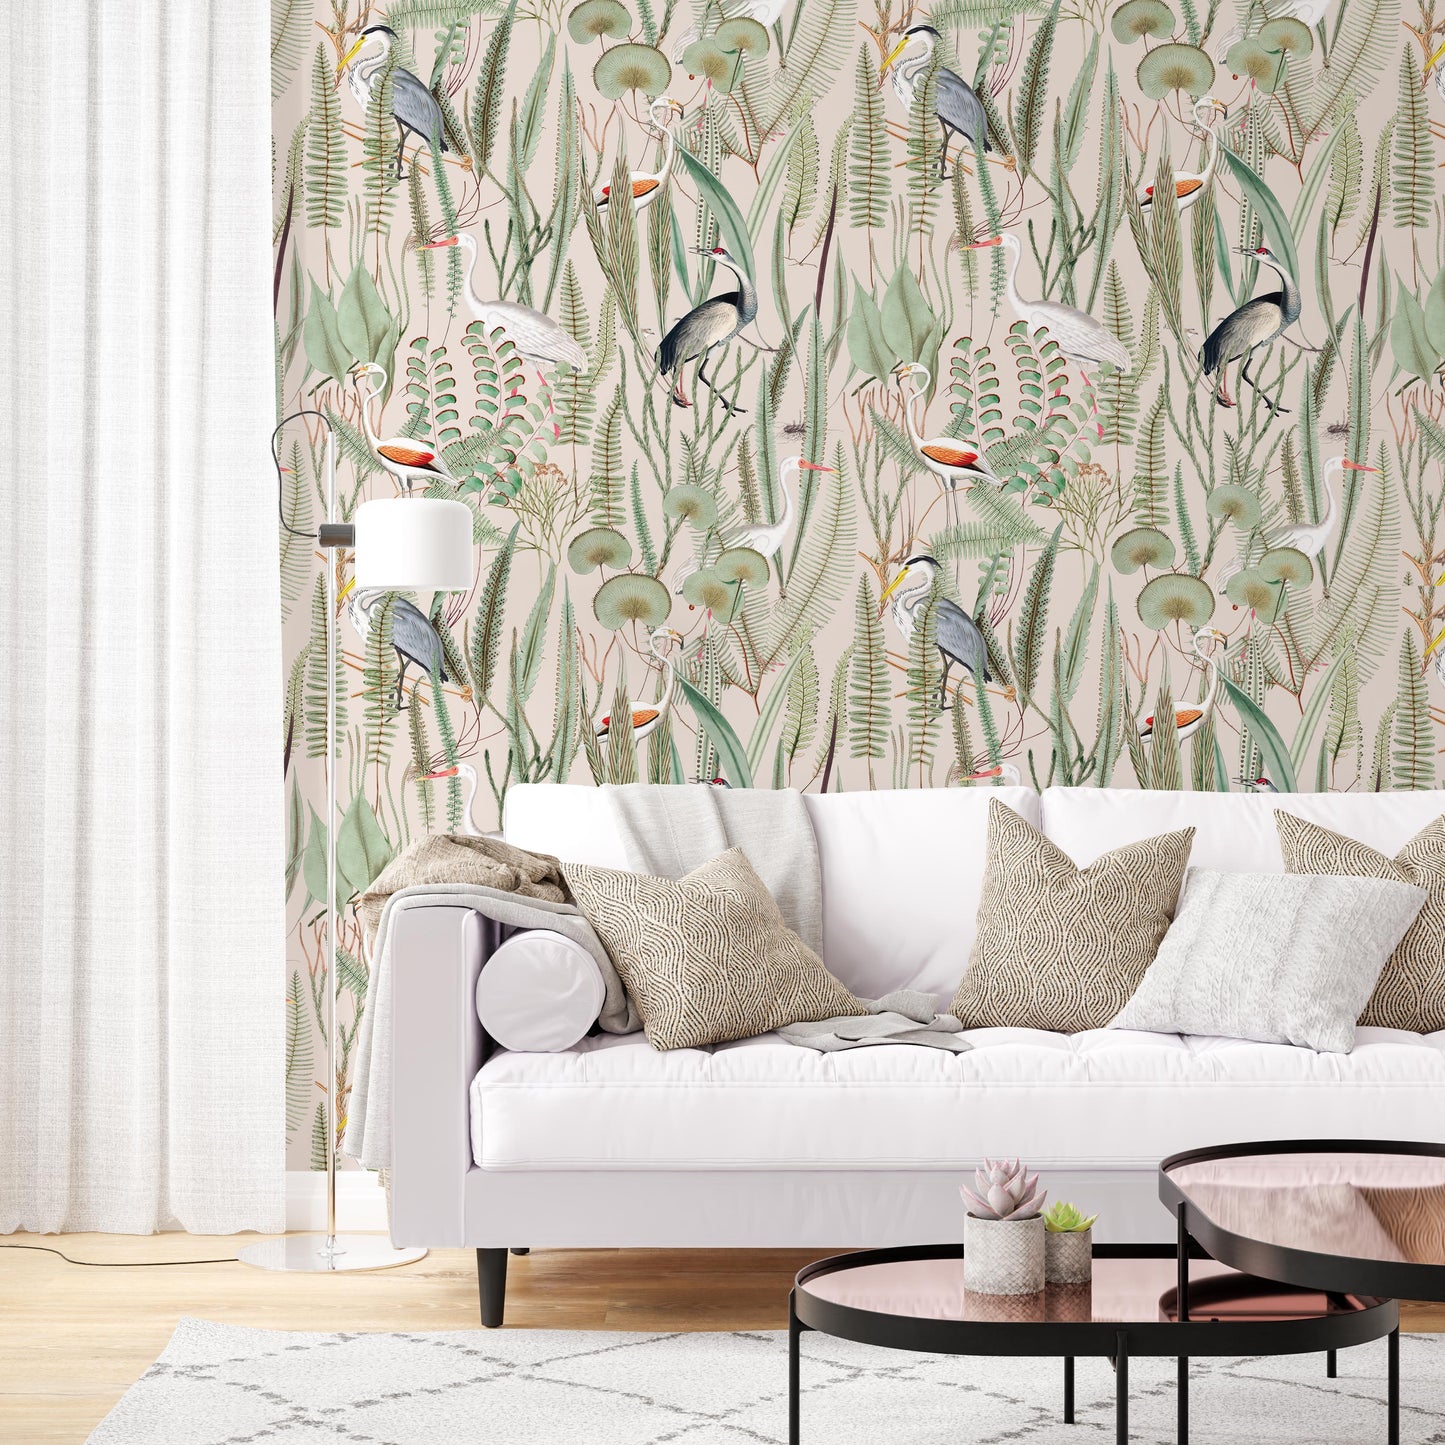 Envision your living room transformed into a tranquil oasis with our captivating pink botanical crane peel-and-stick accent wallpaper. This statement piece features graceful herons amidst a vibrant floral tapestry, creating a breathtaking backdrop for your cozy living room. Complement the wallpaper's romantic hues with a plush white couch and linen interior accents, evoking a sense of serenity and elegance.